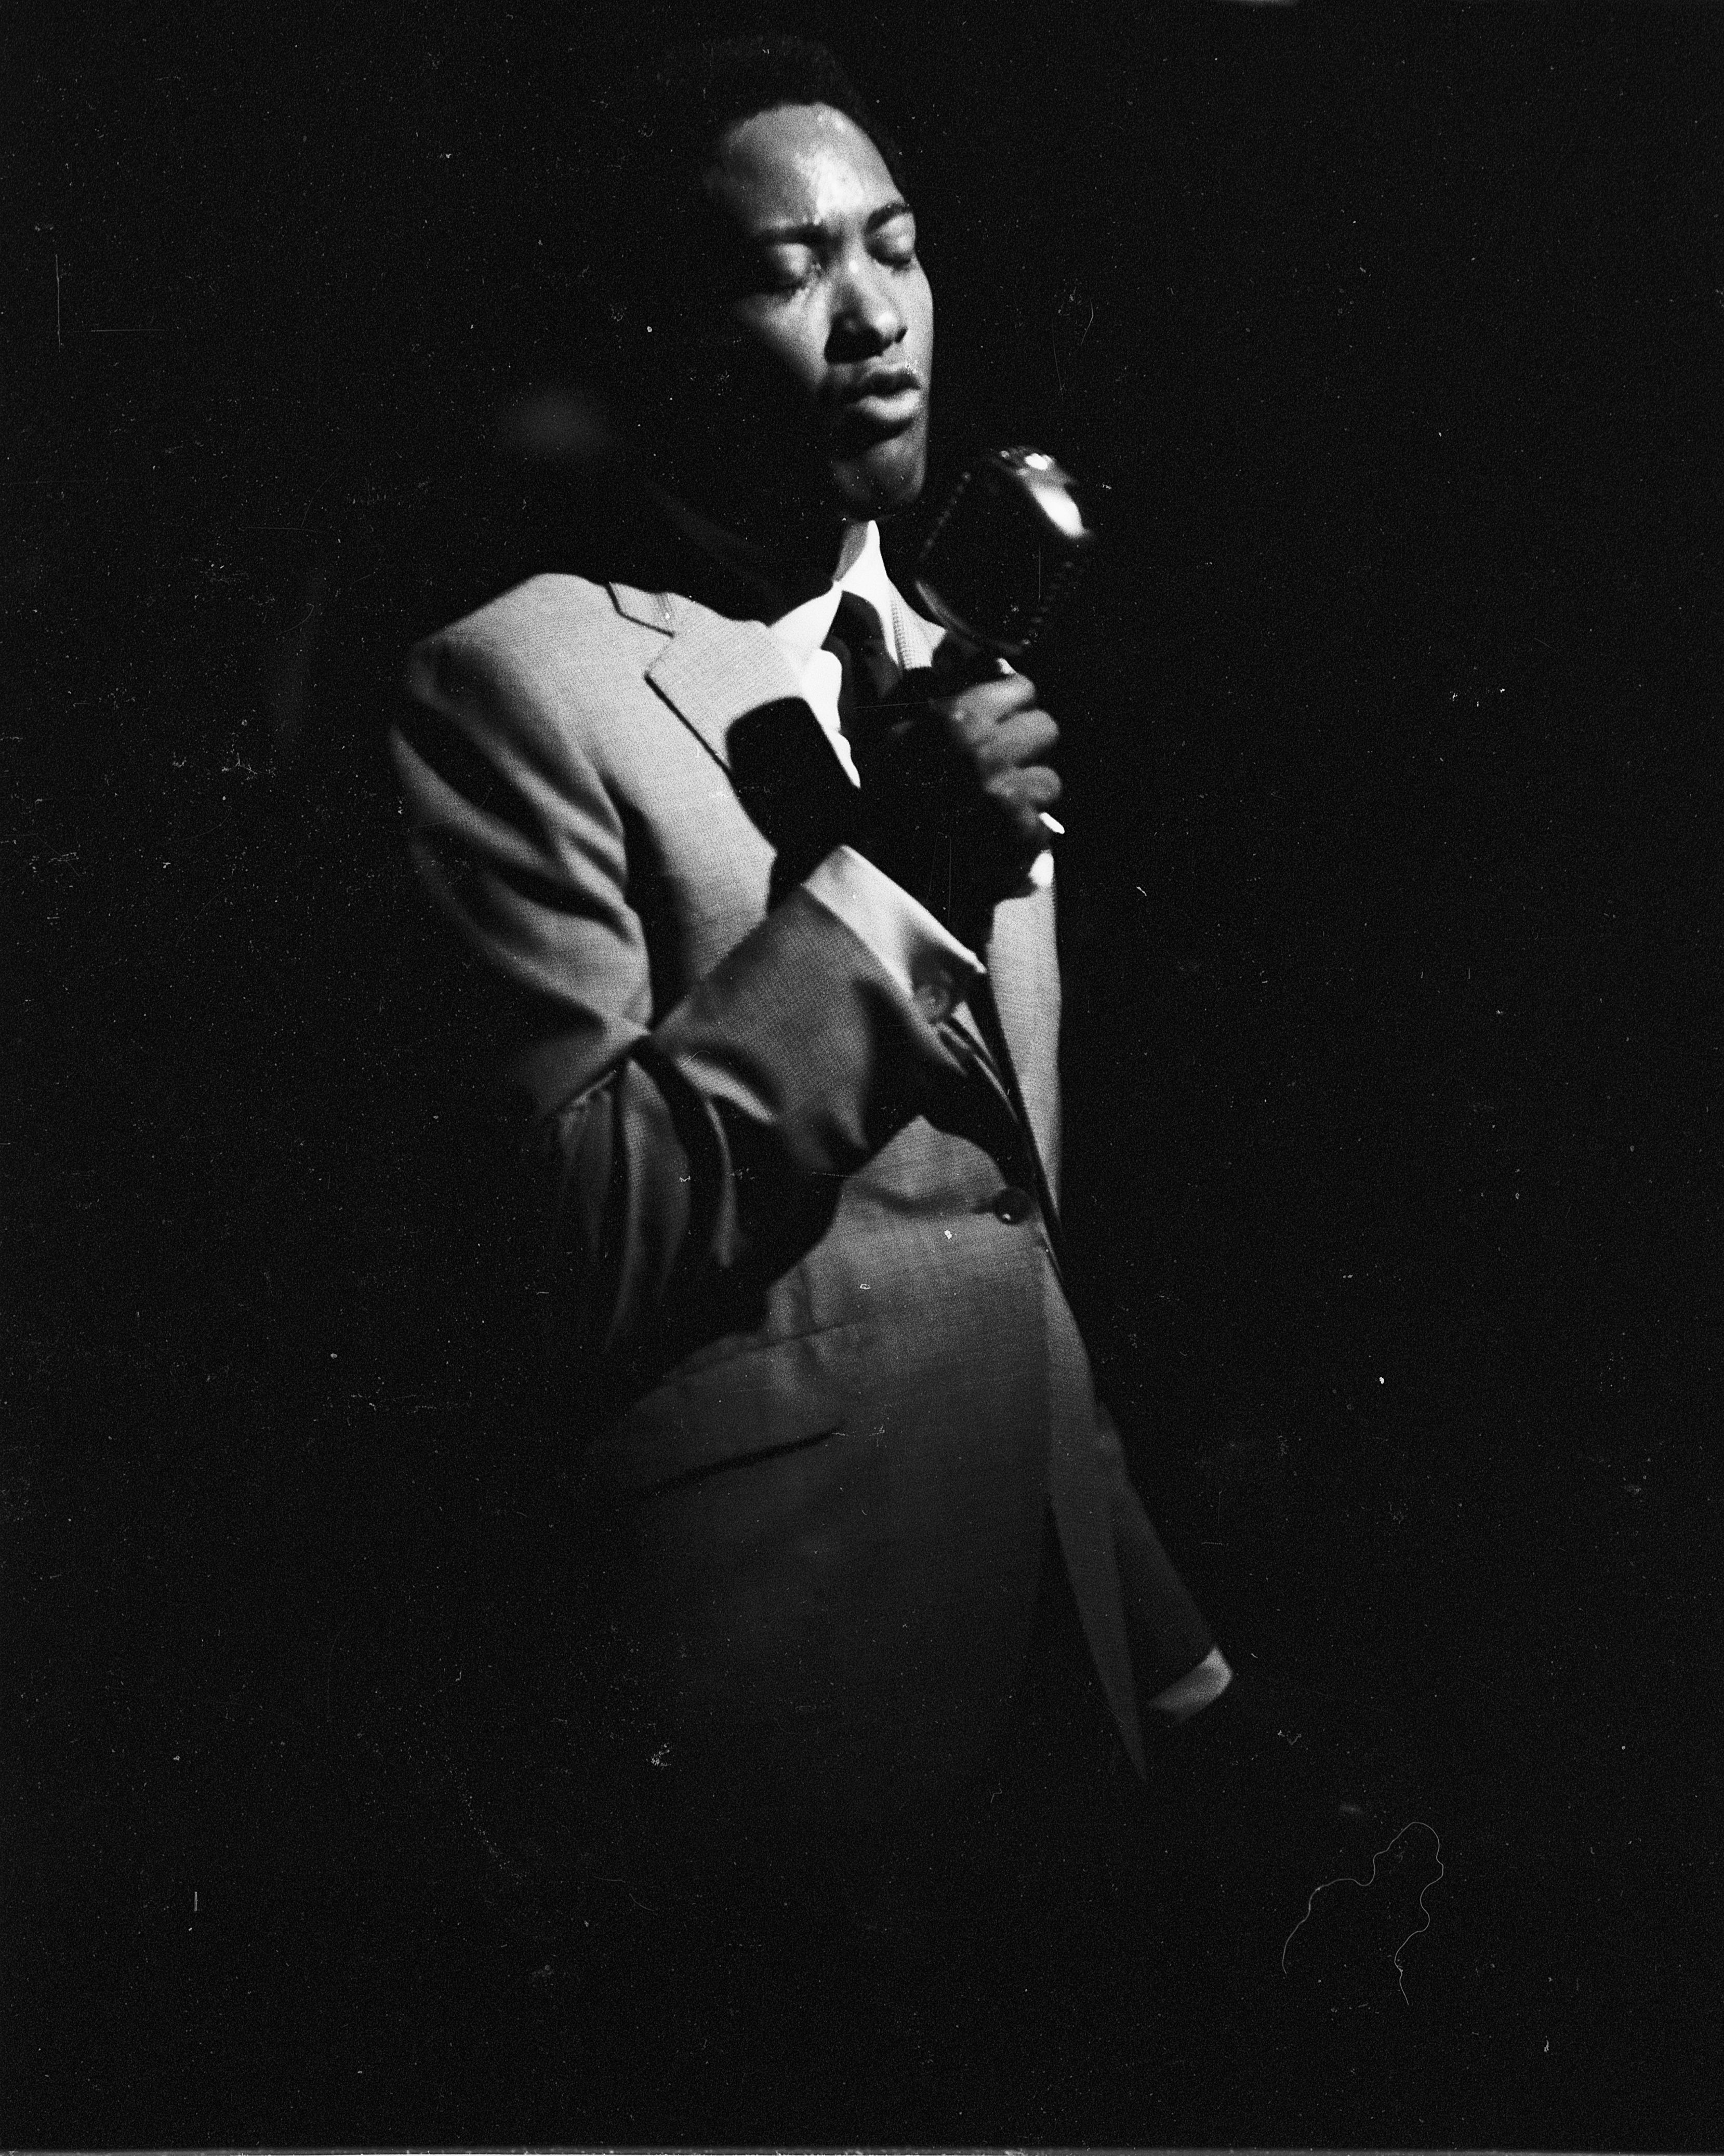 Sam Cooke (1931 – 1964), singer, songwriter and civil-rights activist, on stage with band at New York's Copacabana nightclub in June 1964. | Source: Getty Images